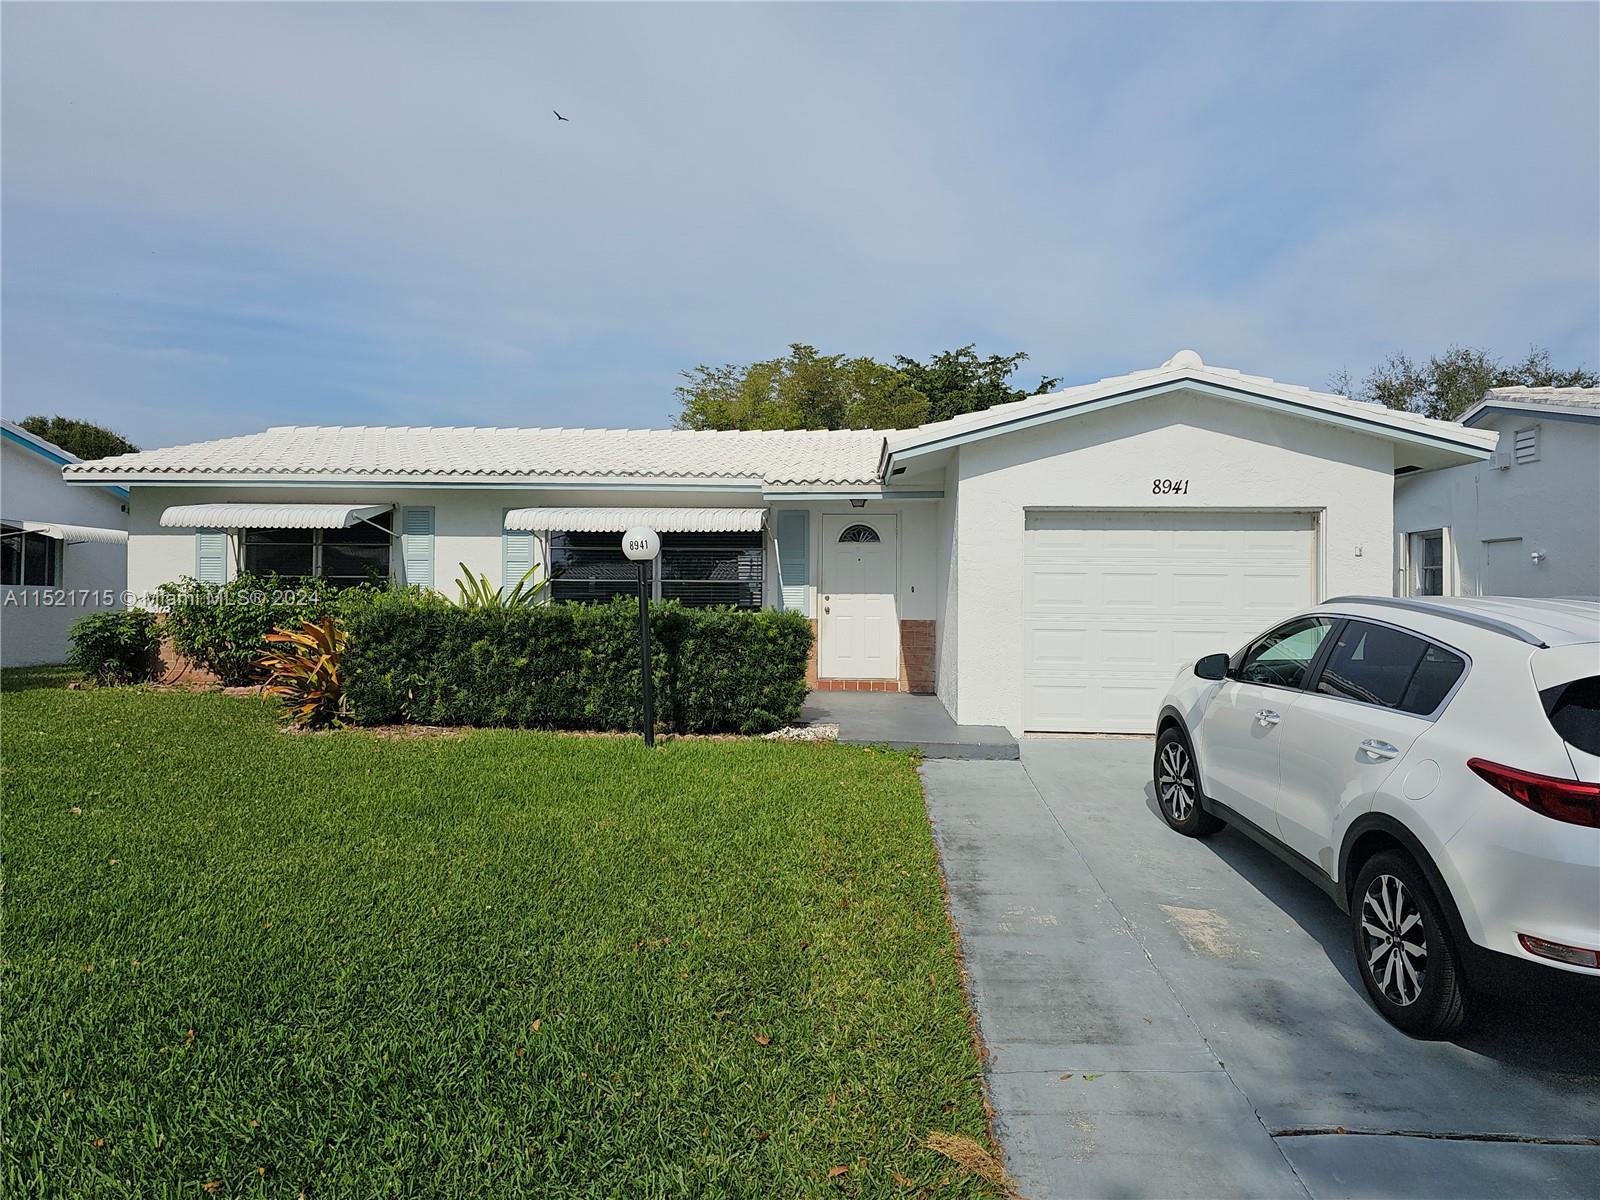 Photo of 8941 NW 12th Pl in Plantation, FL